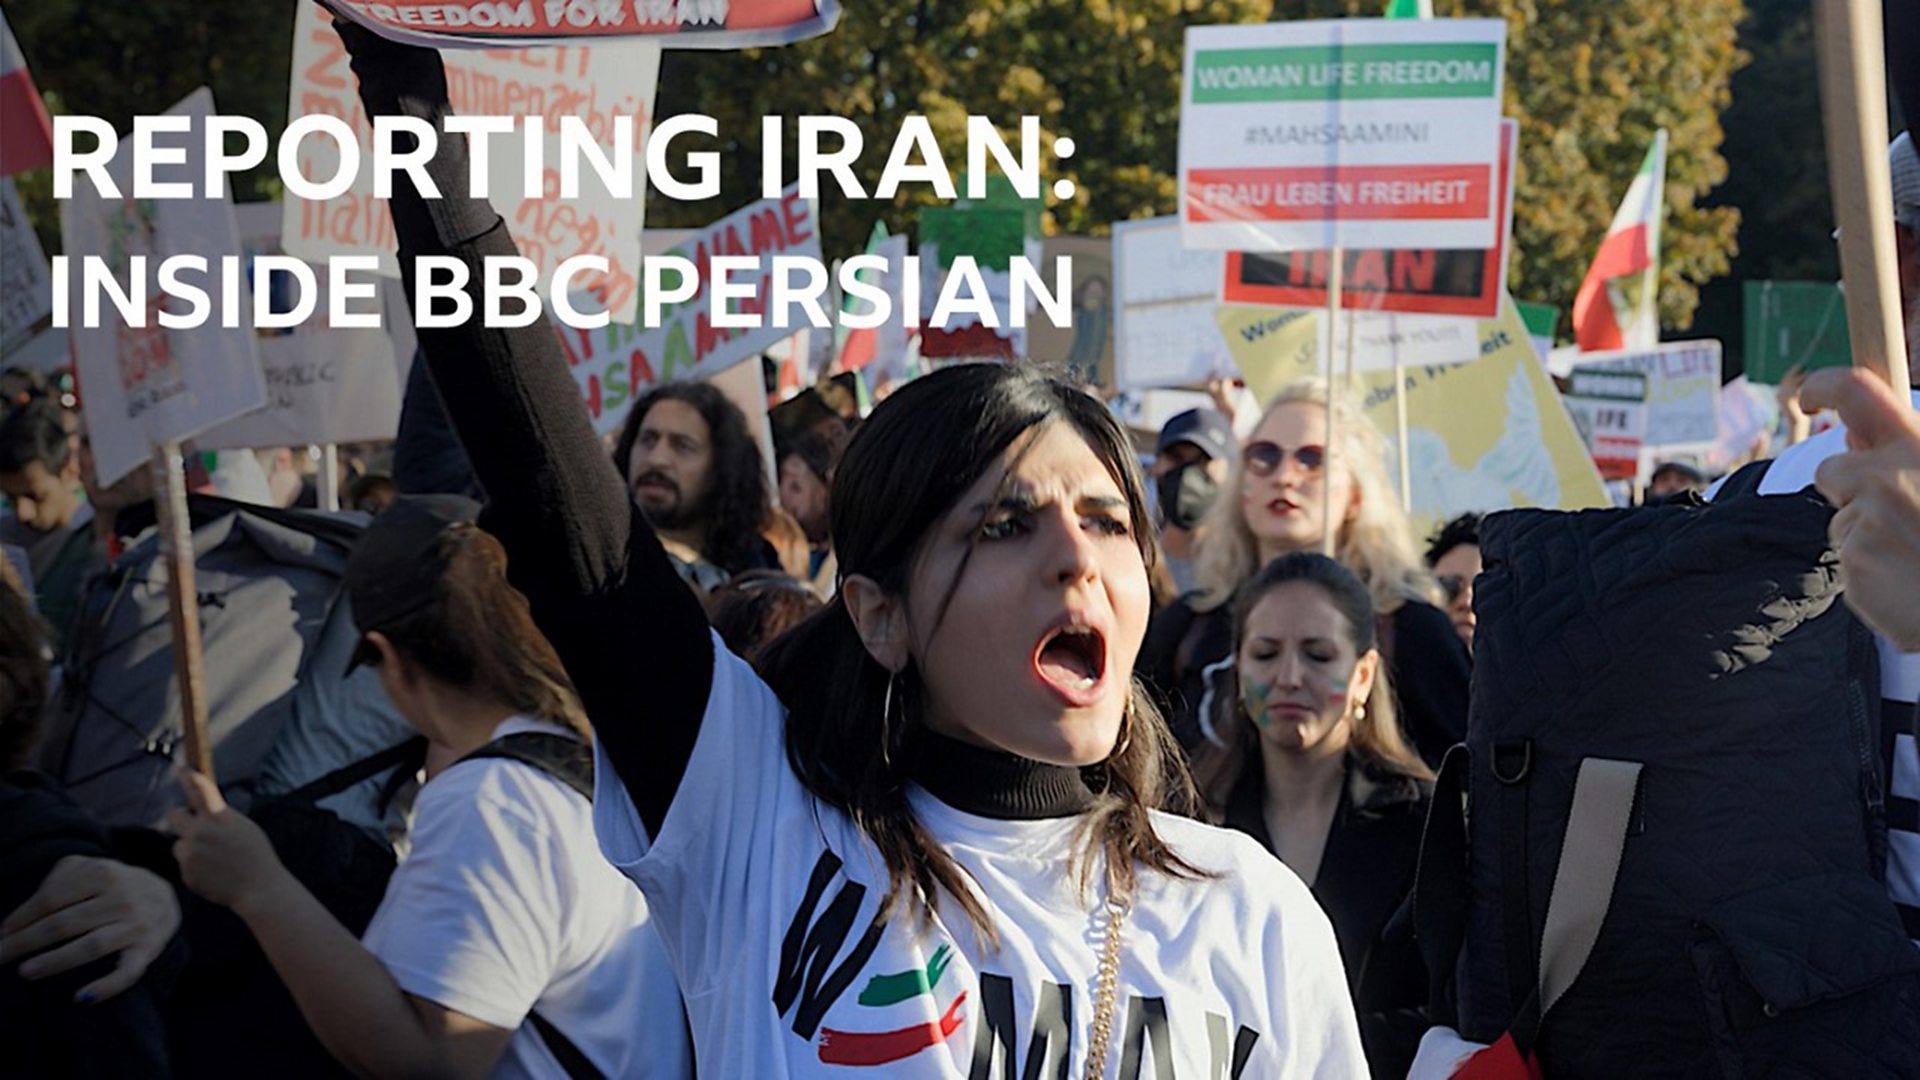 Reporting Iran: Inside BBC Persian - A new documentary offers a candid look  at BBC Persian journalists at work - Media Centre